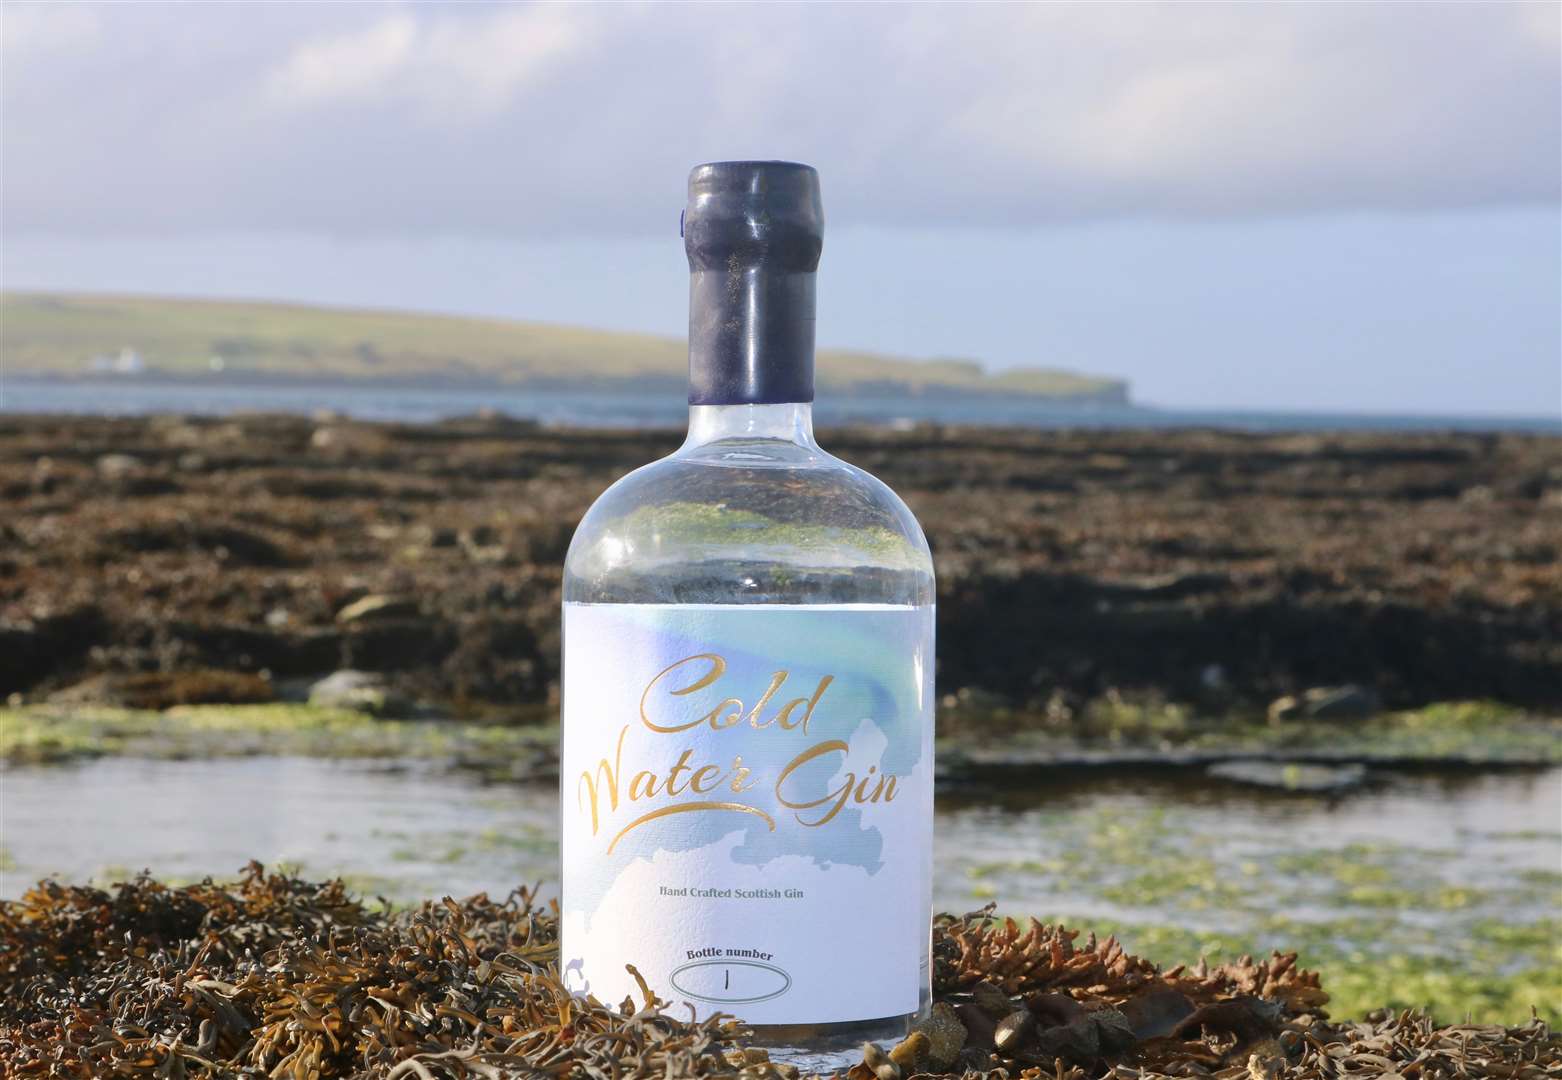 A bottle of Cold Water Gin at Thurso East, a location known for its cold water surf.